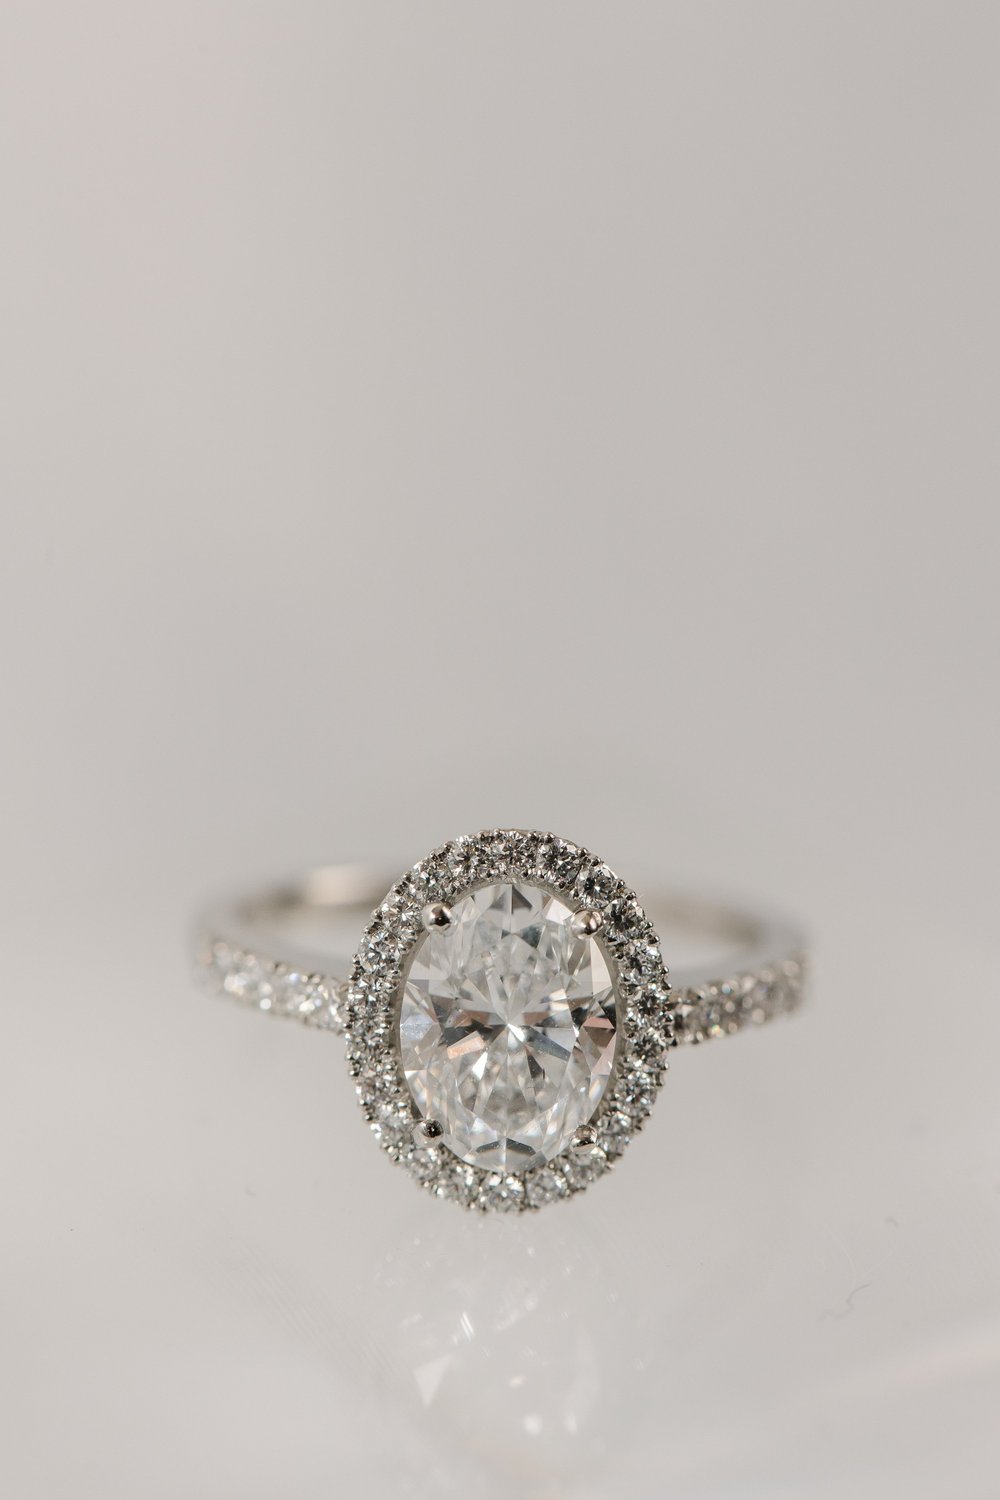 Oval cut halo diamond engagement ring made by Alexandria &amp; Company in Old Town Alexandria 